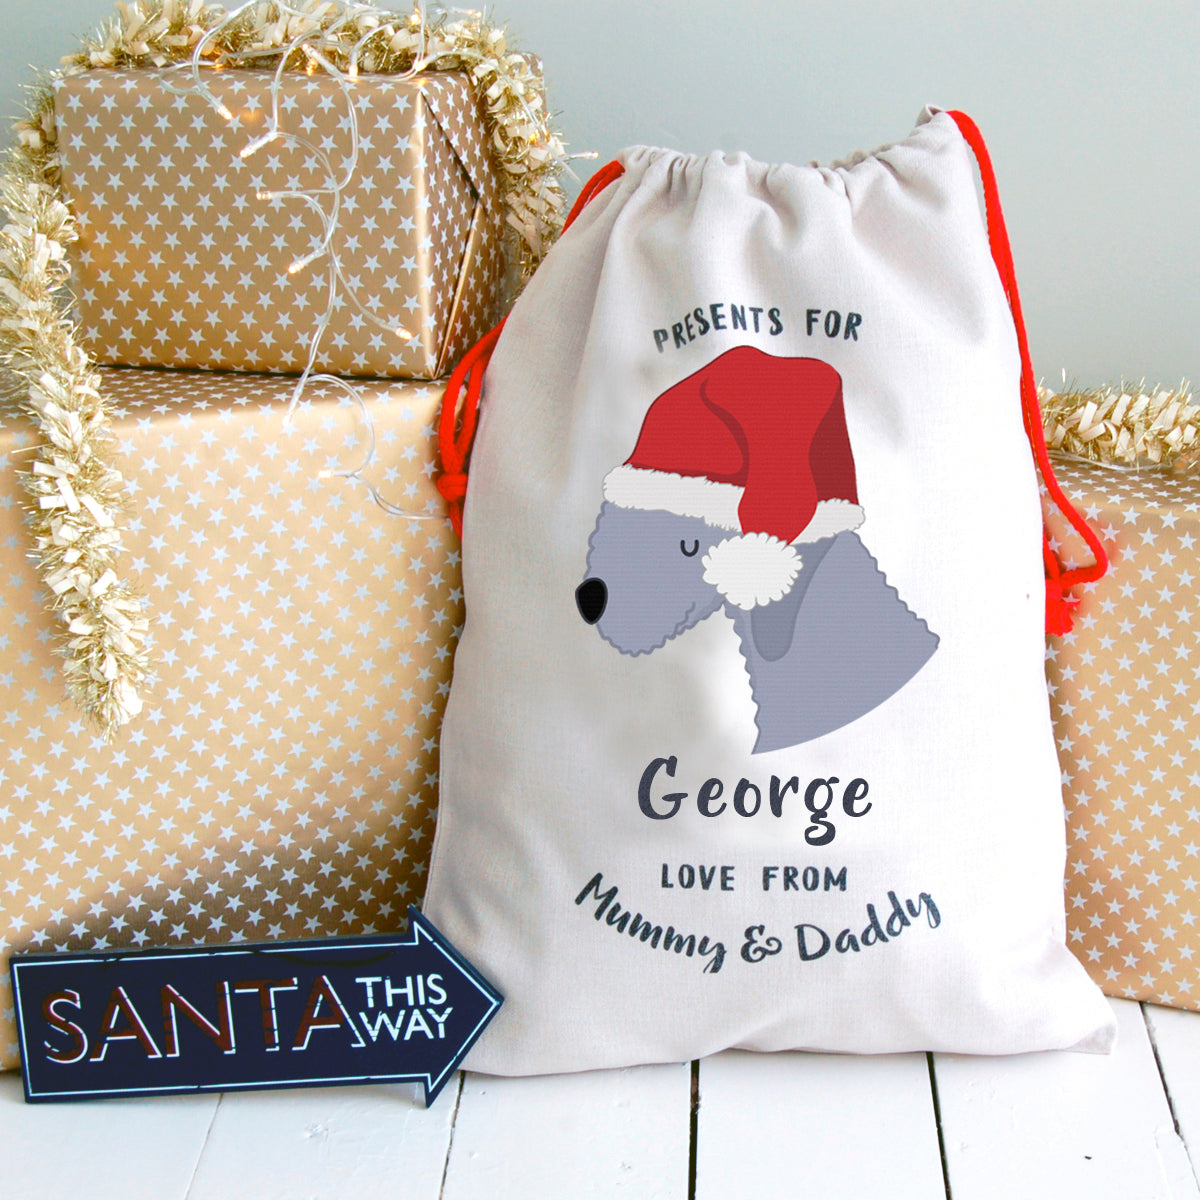 Bedlington Terrier Personalised Christmas Present Sack  - Hoobynoo - Personalised Pet Tags and Gifts